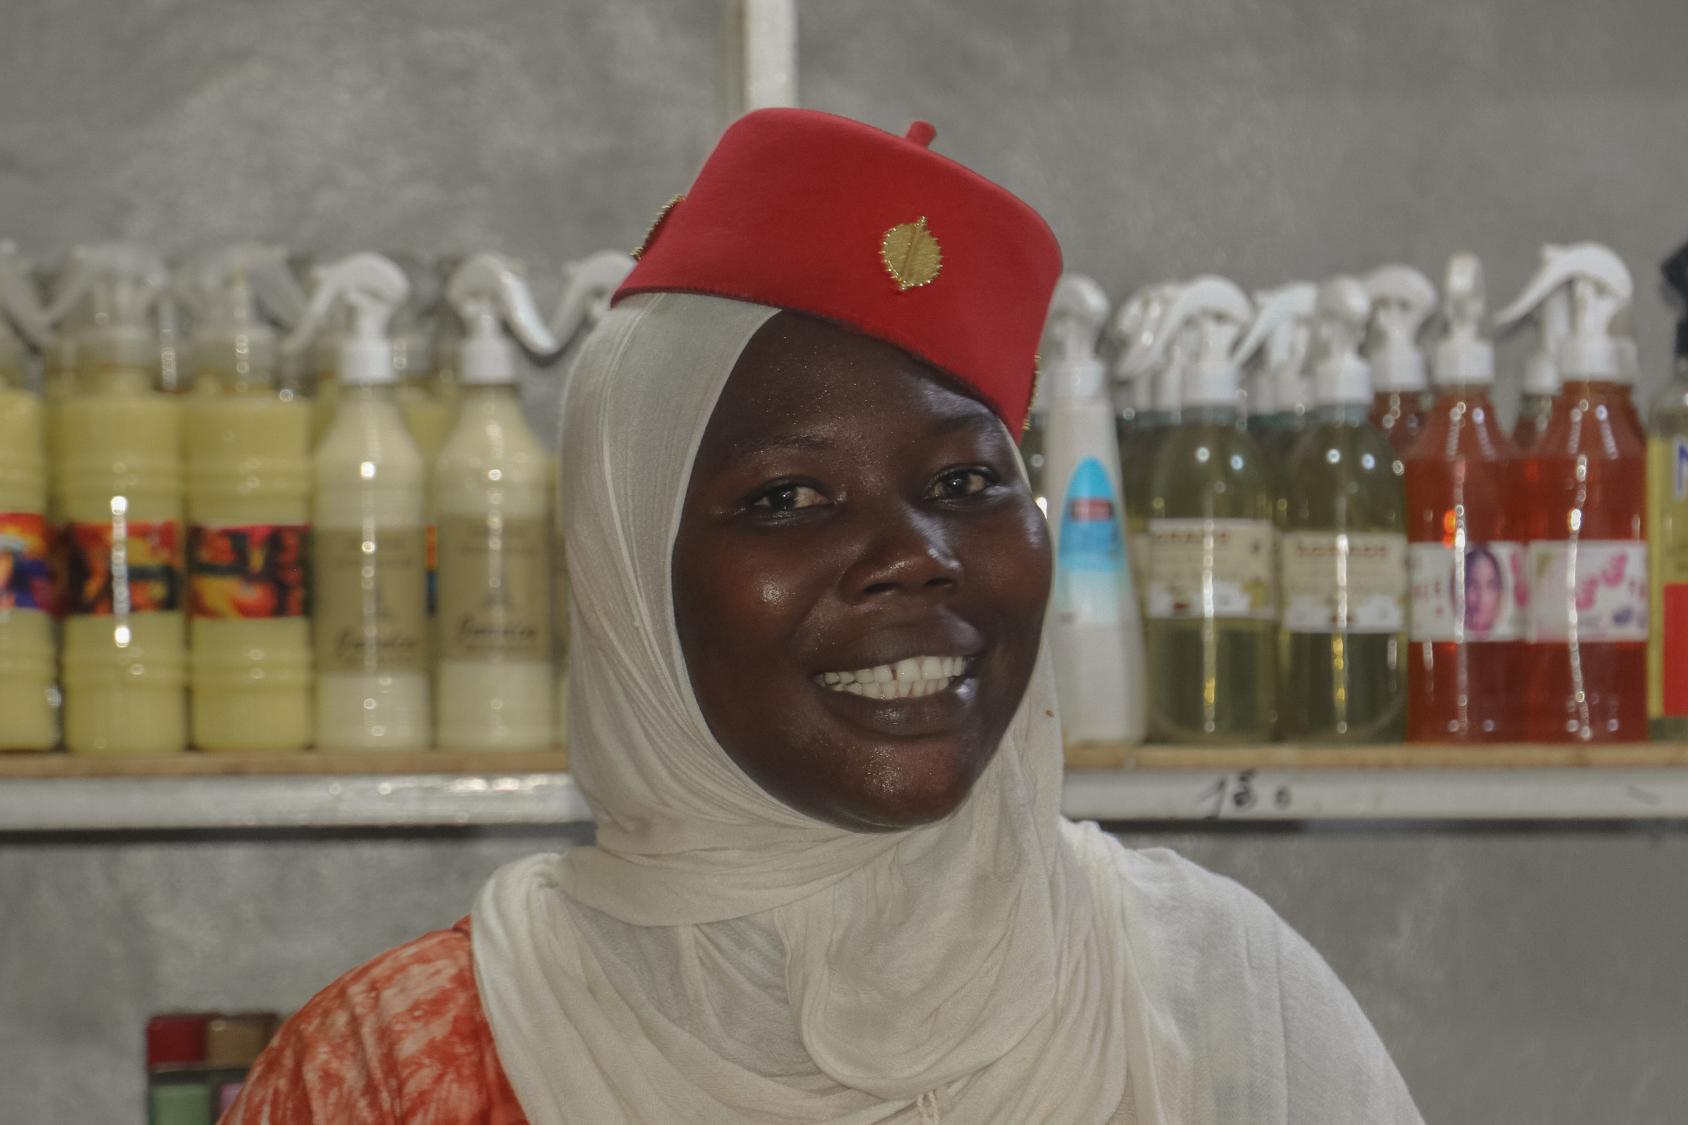 A woman in a white headscarf and red cap stands in front of shelves of beauty products